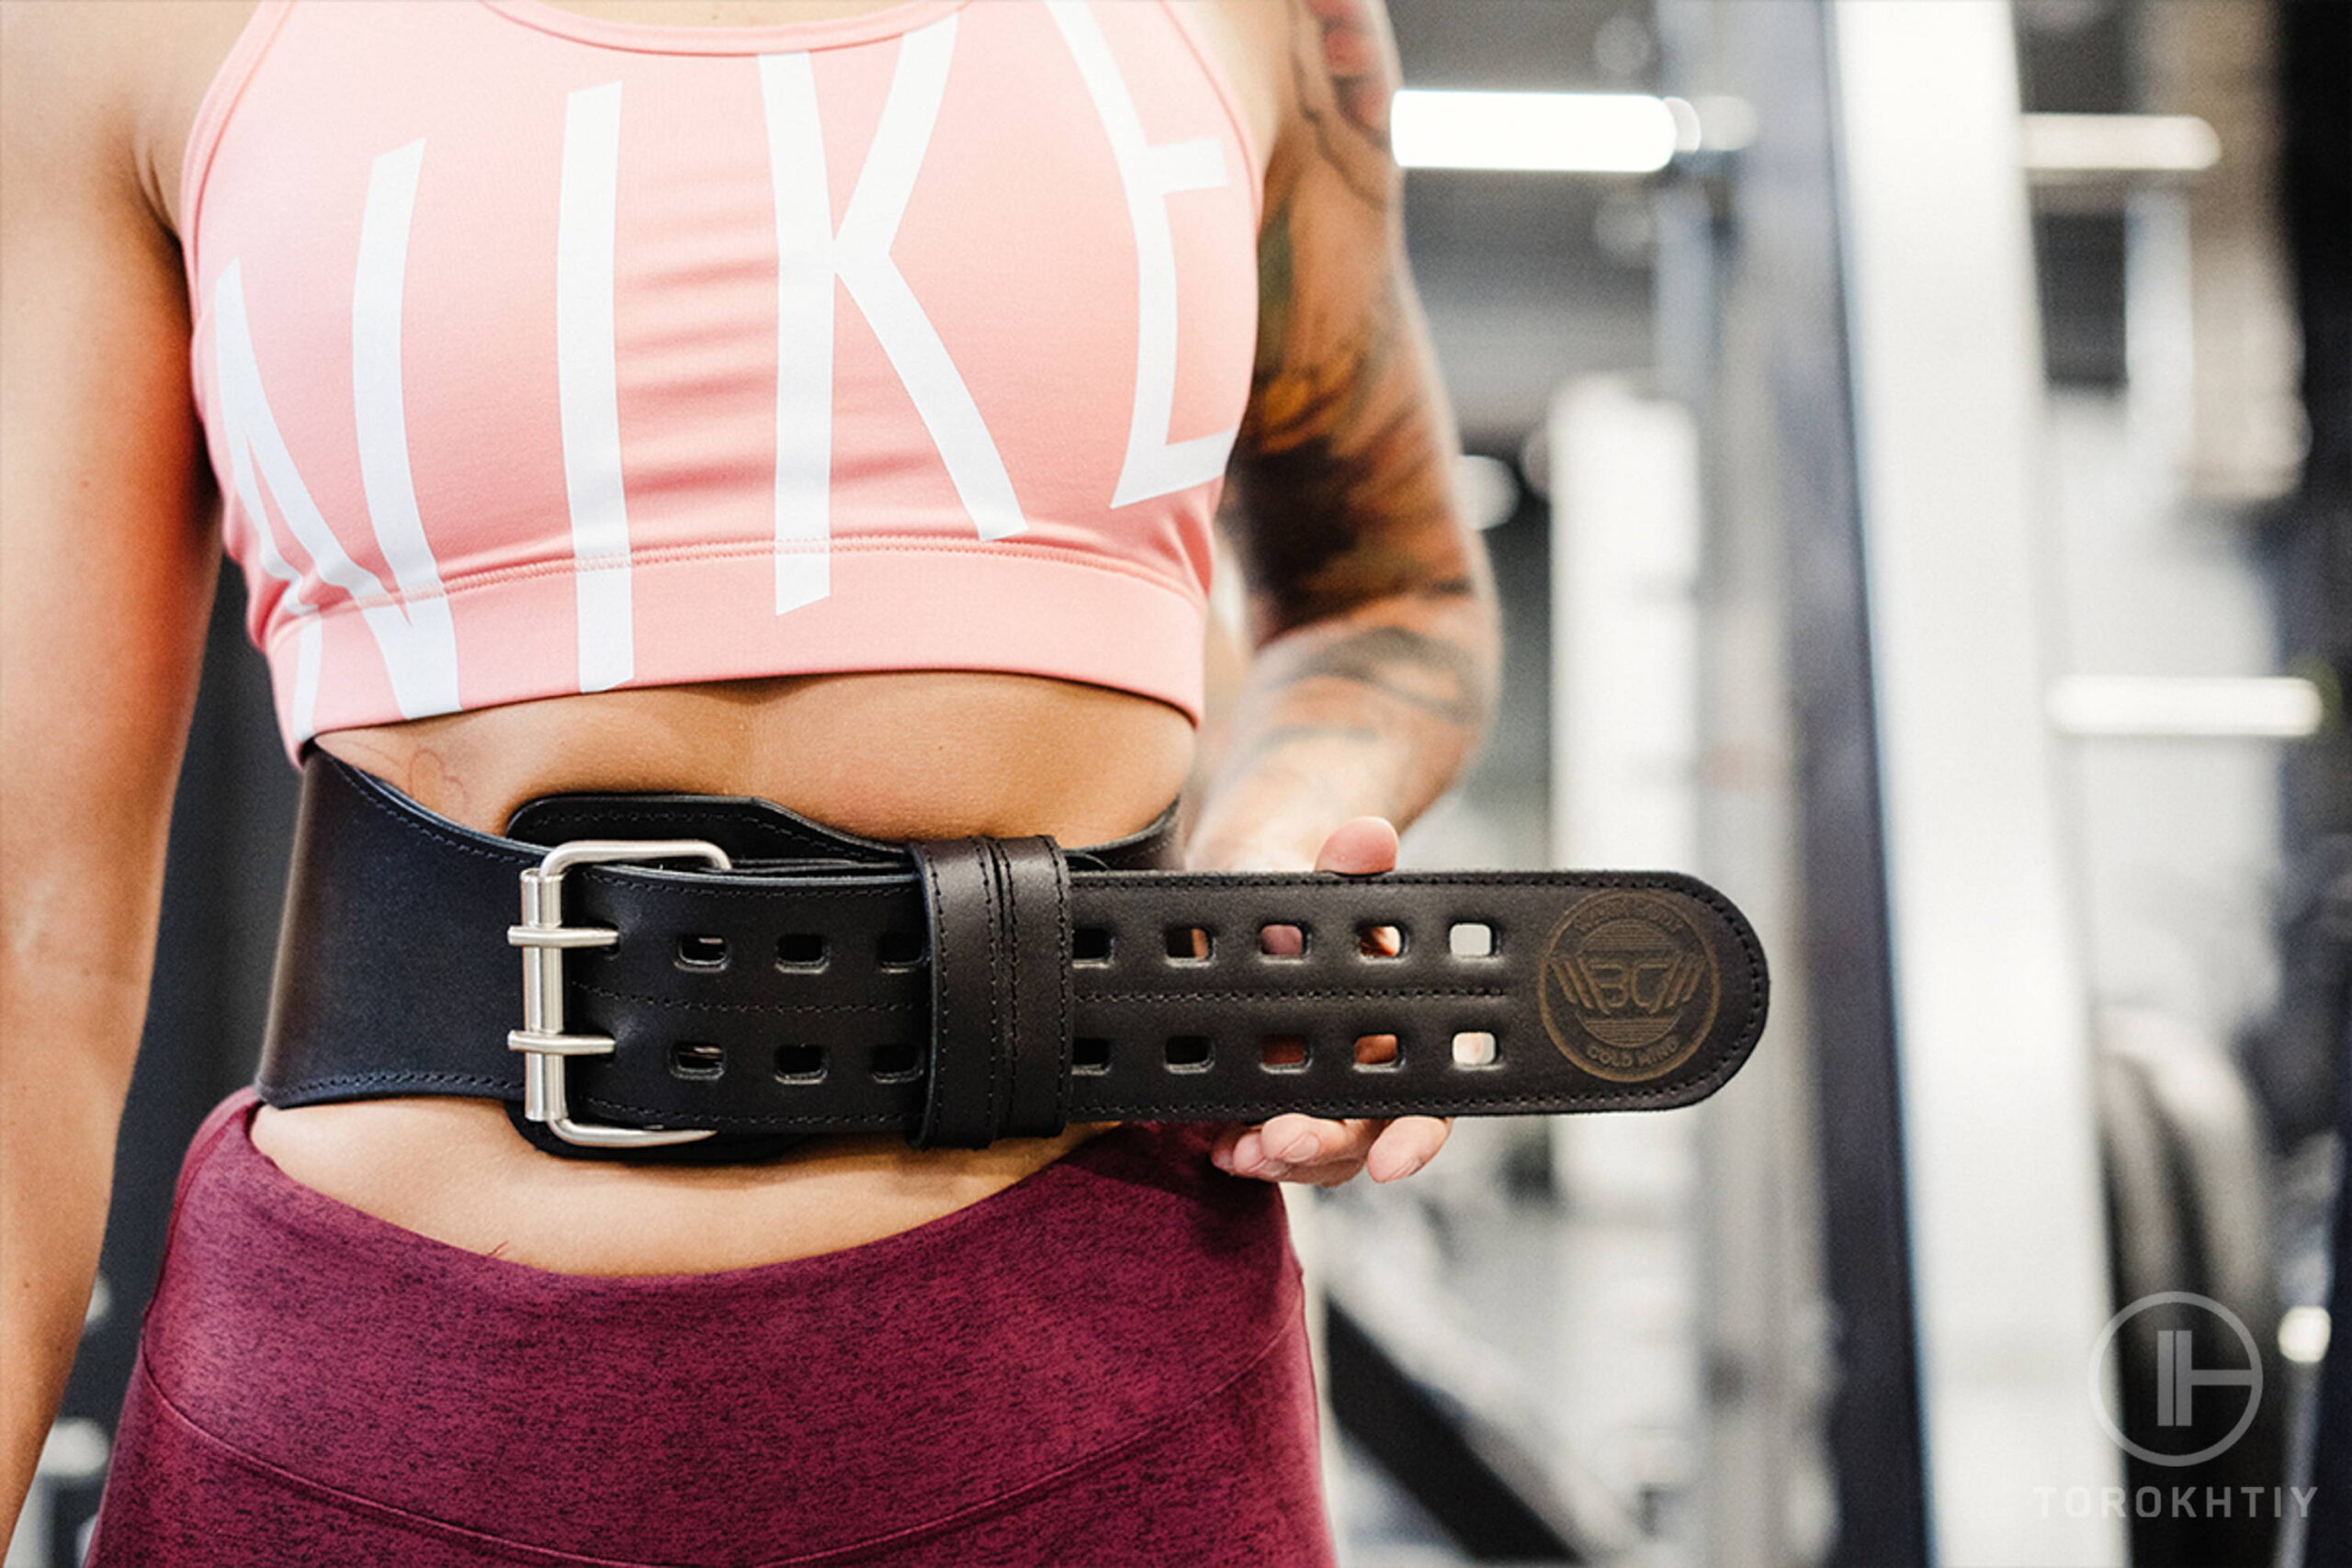 How Tight Should Your Lever Belt Be? #shorts #leverbelt #fitness #tutorial  